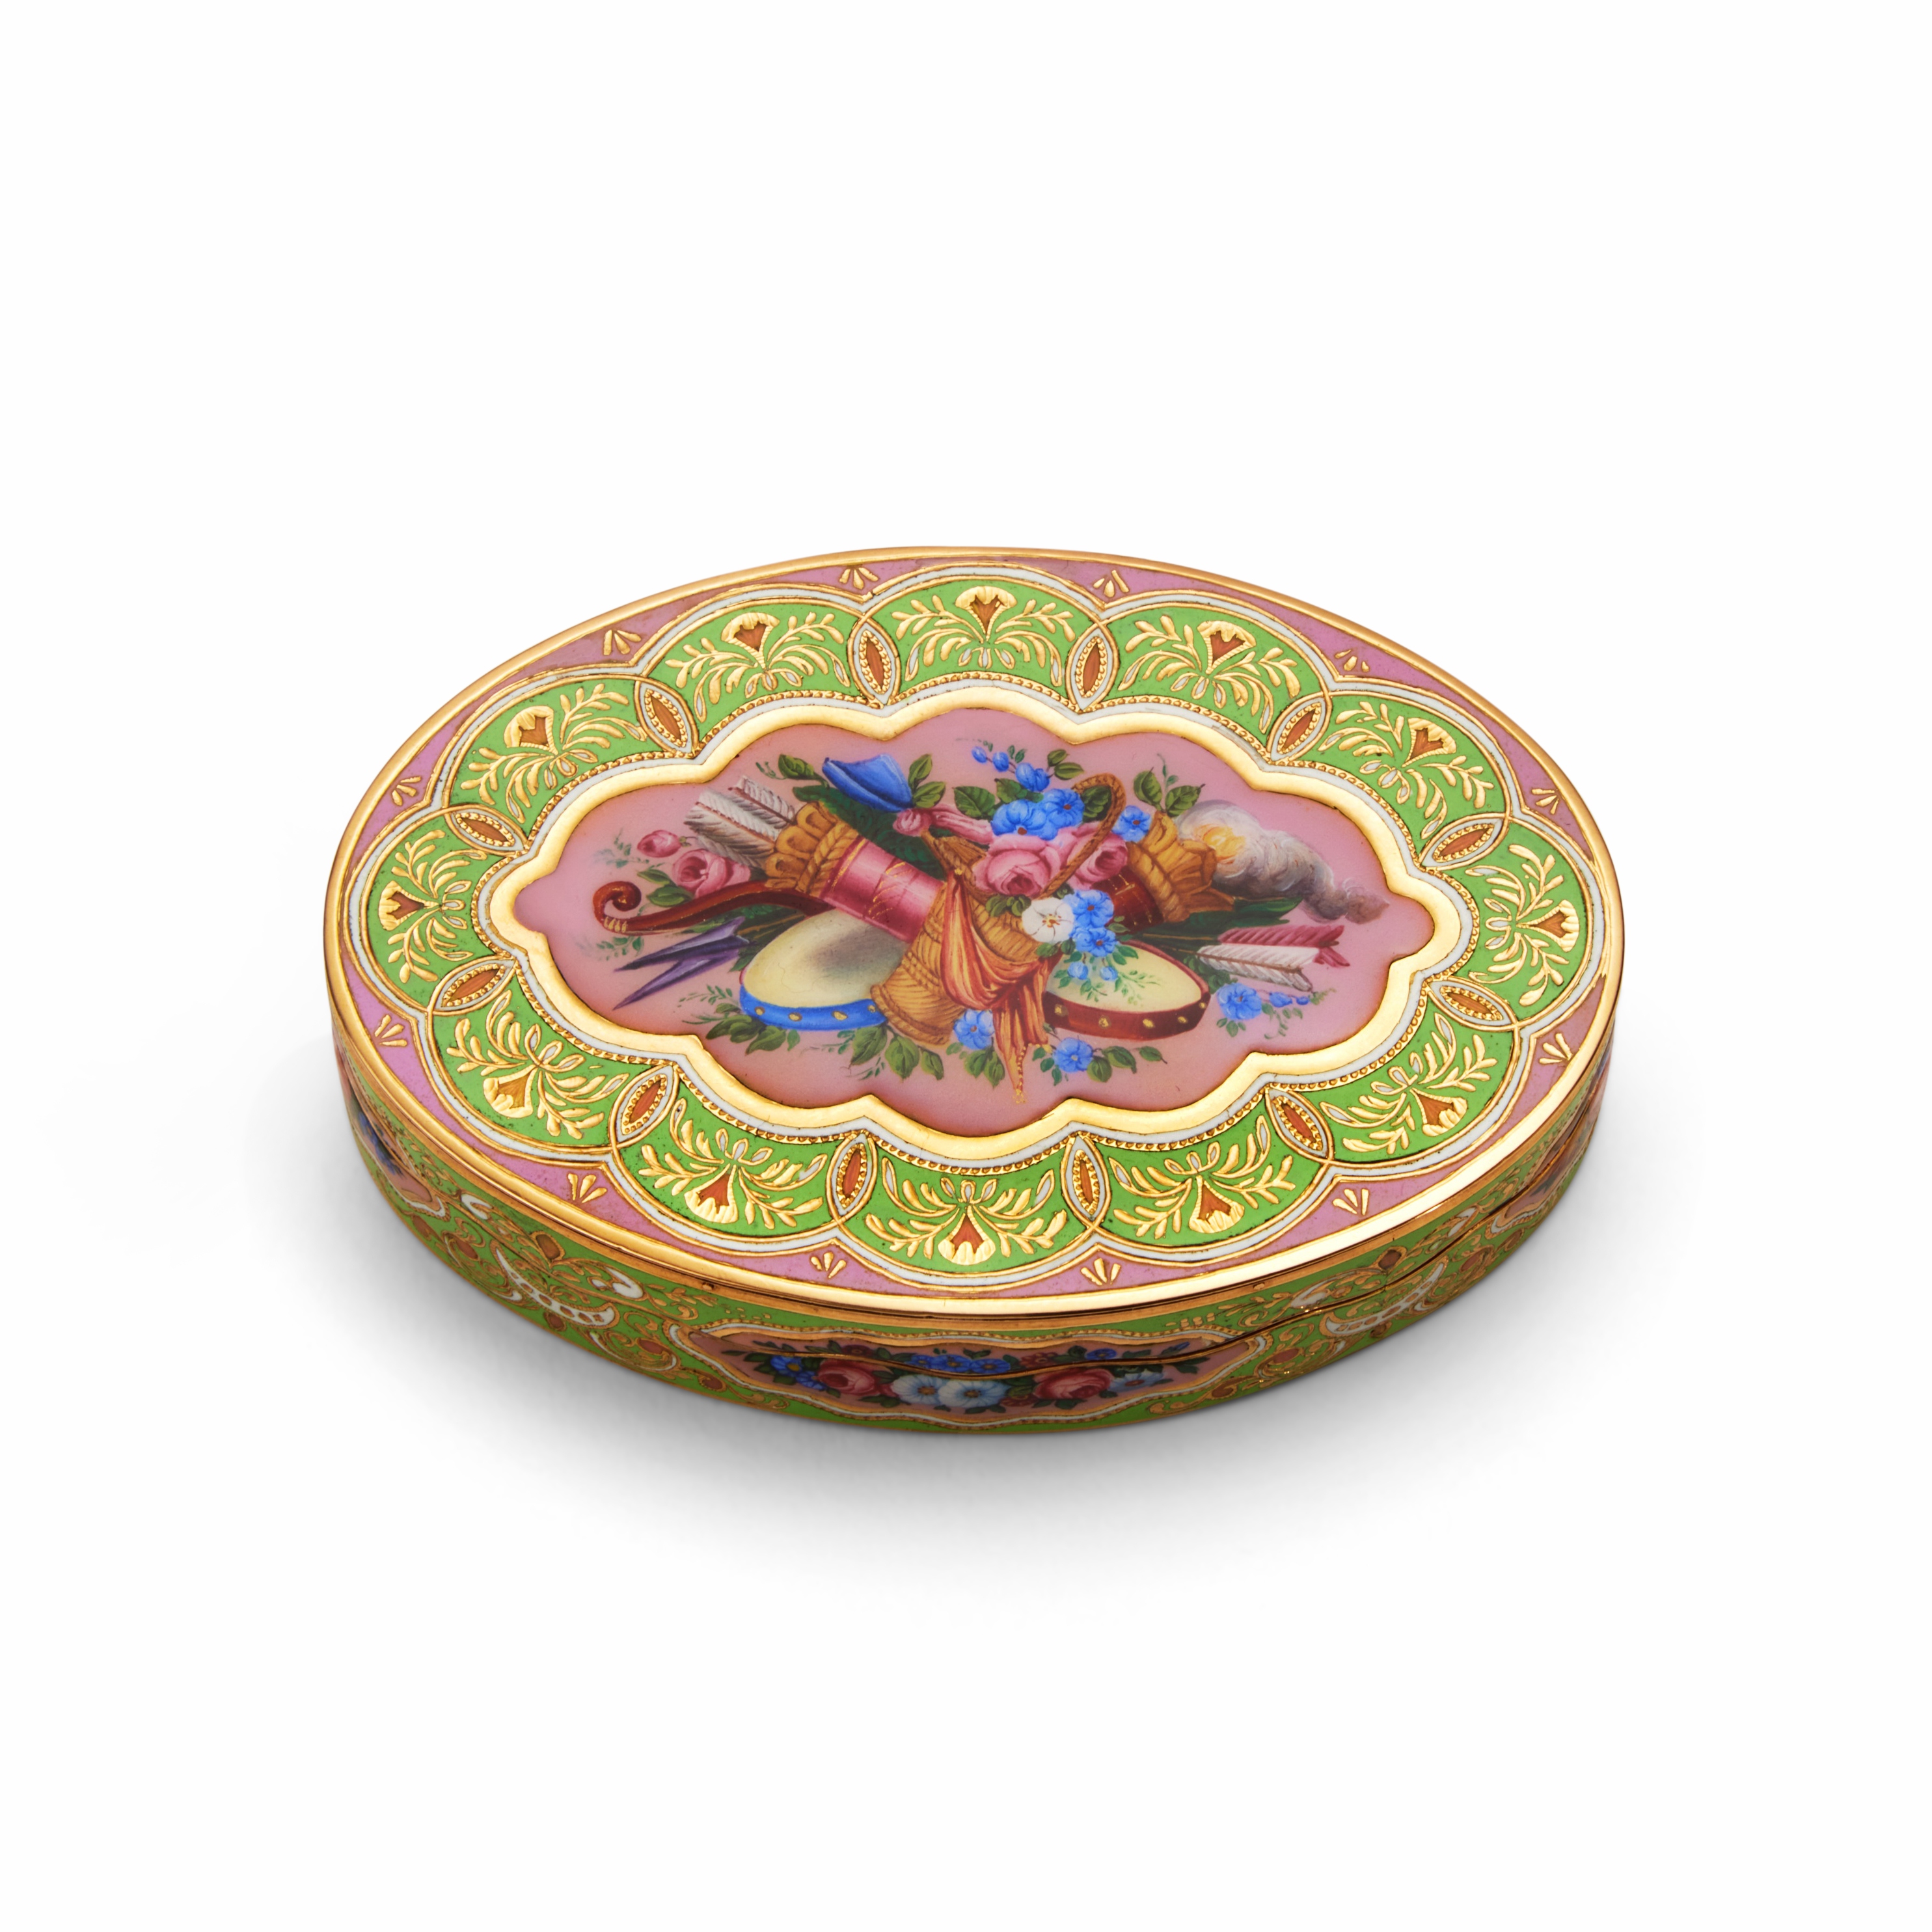 A Swiss Enameled Gold Snuff Box For The Turkish Market, Probably Geneva, Circa 1830